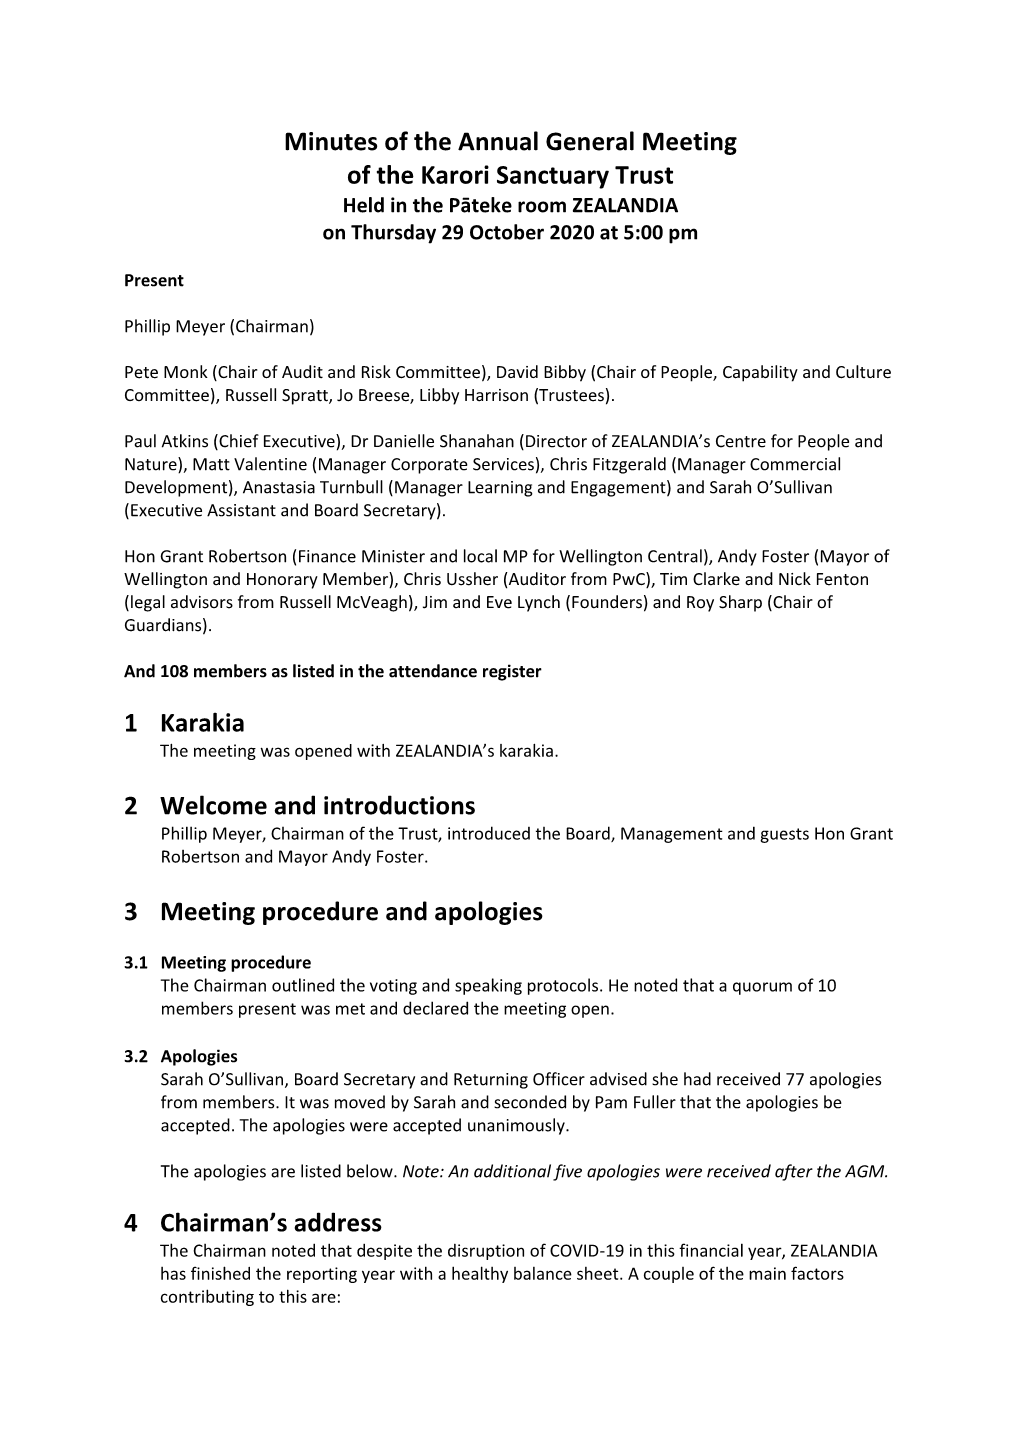 Minutes of the Annual General Meeting of the Karori Sanctuary Trust Held in the Pāteke Room ZEALANDIA on Thursday 29 October 2020 at 5:00 Pm